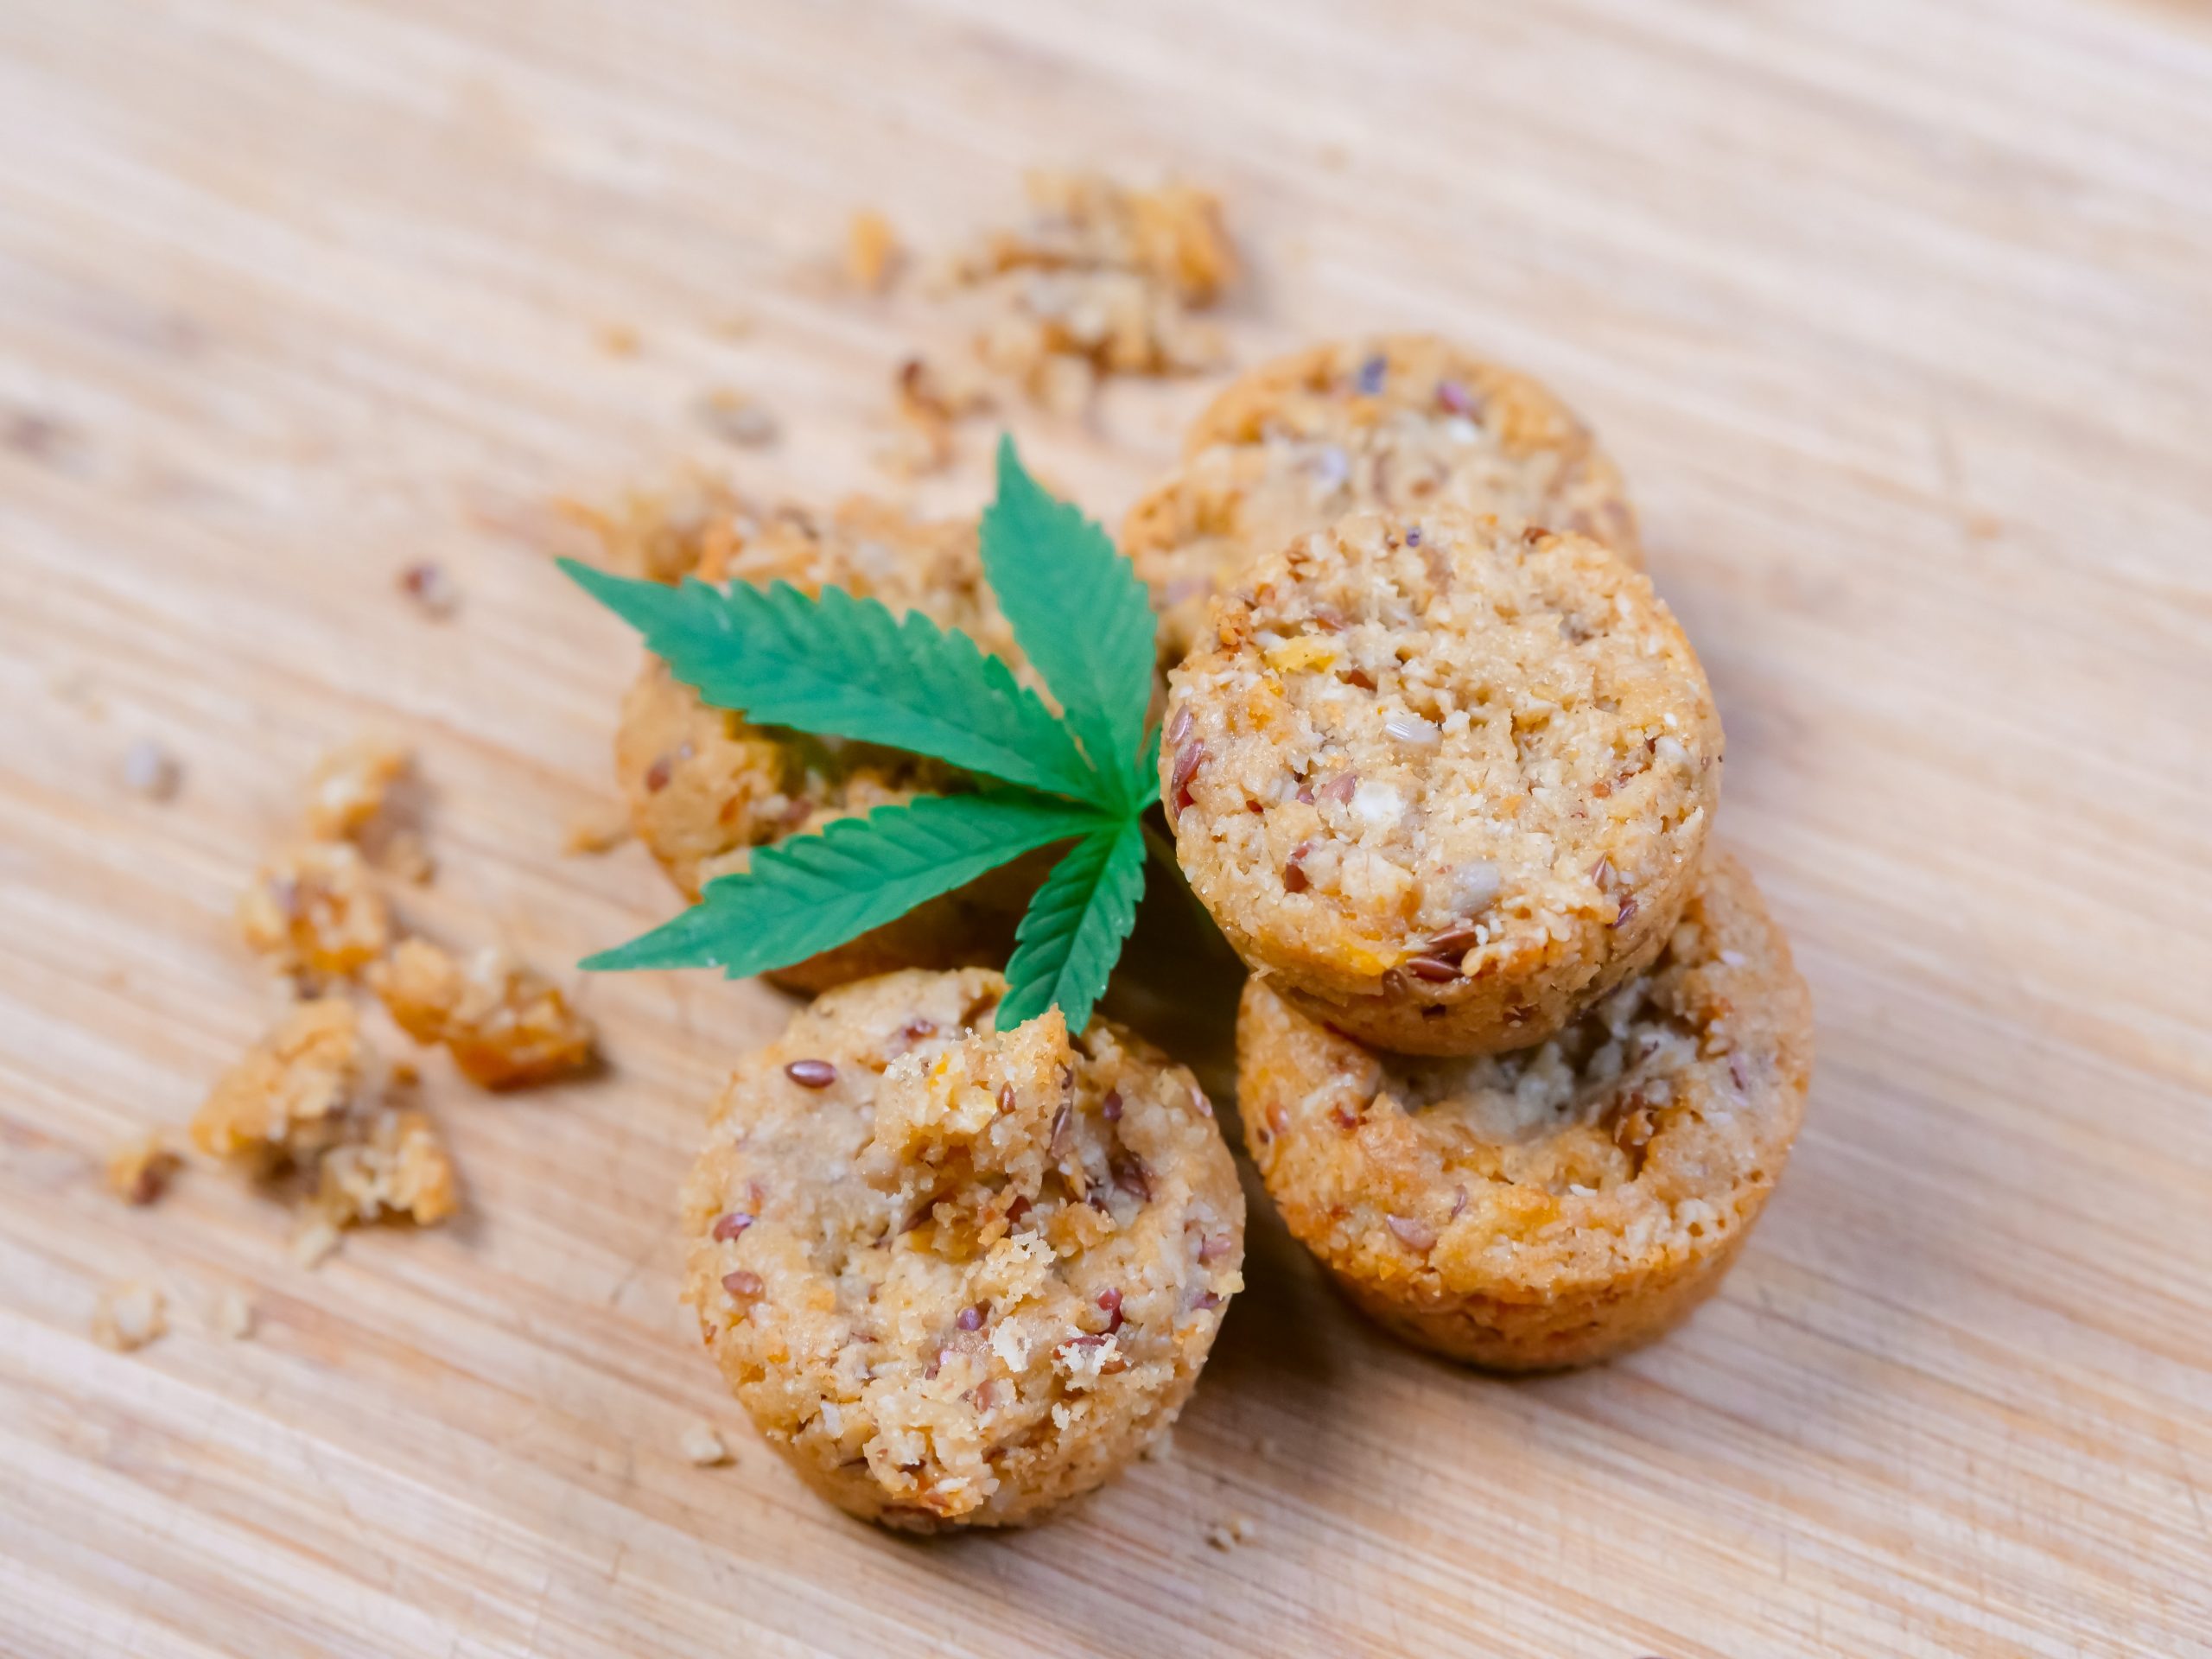 how to sell edibles legally canada